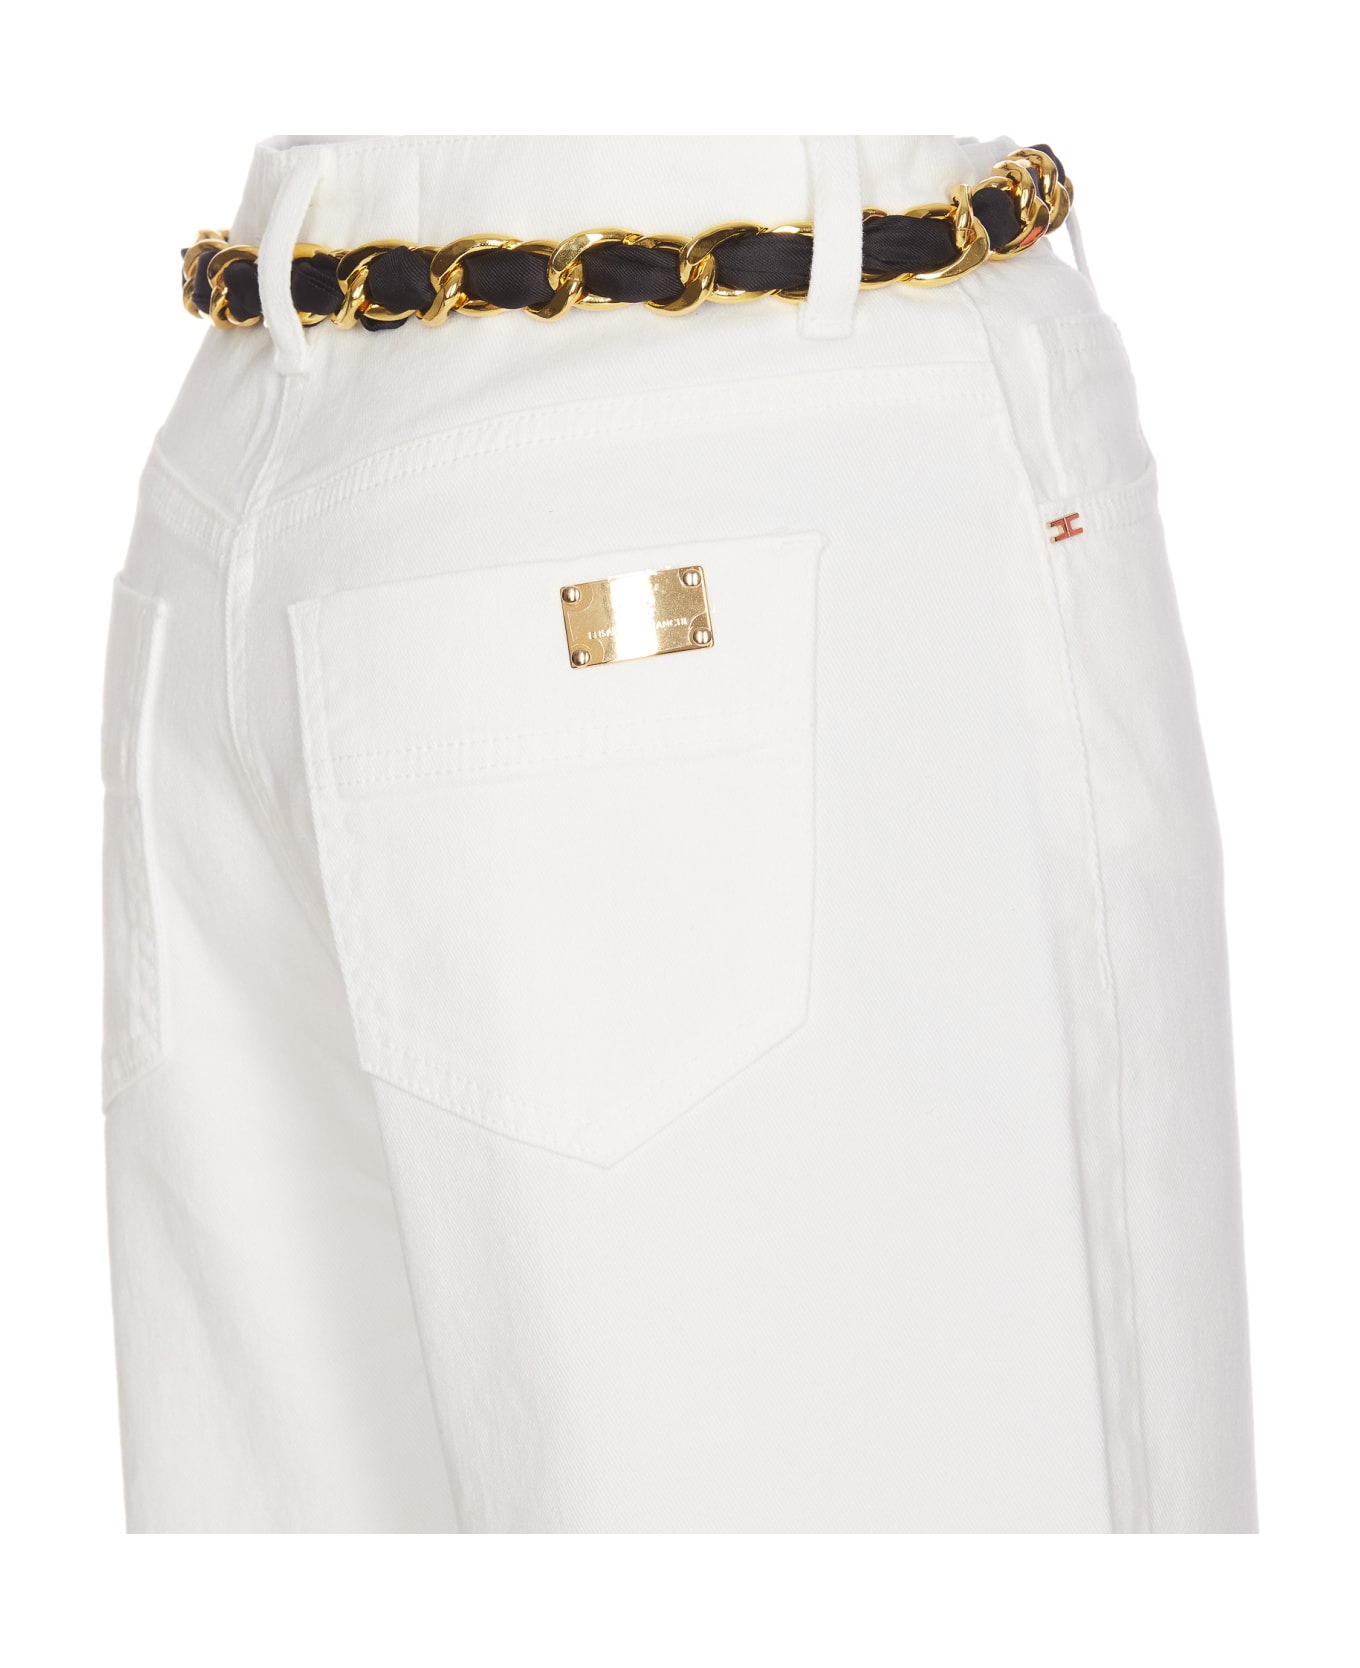 Elisabetta Franchi Cropped Wide Jeans With Chain Belt - Ivory